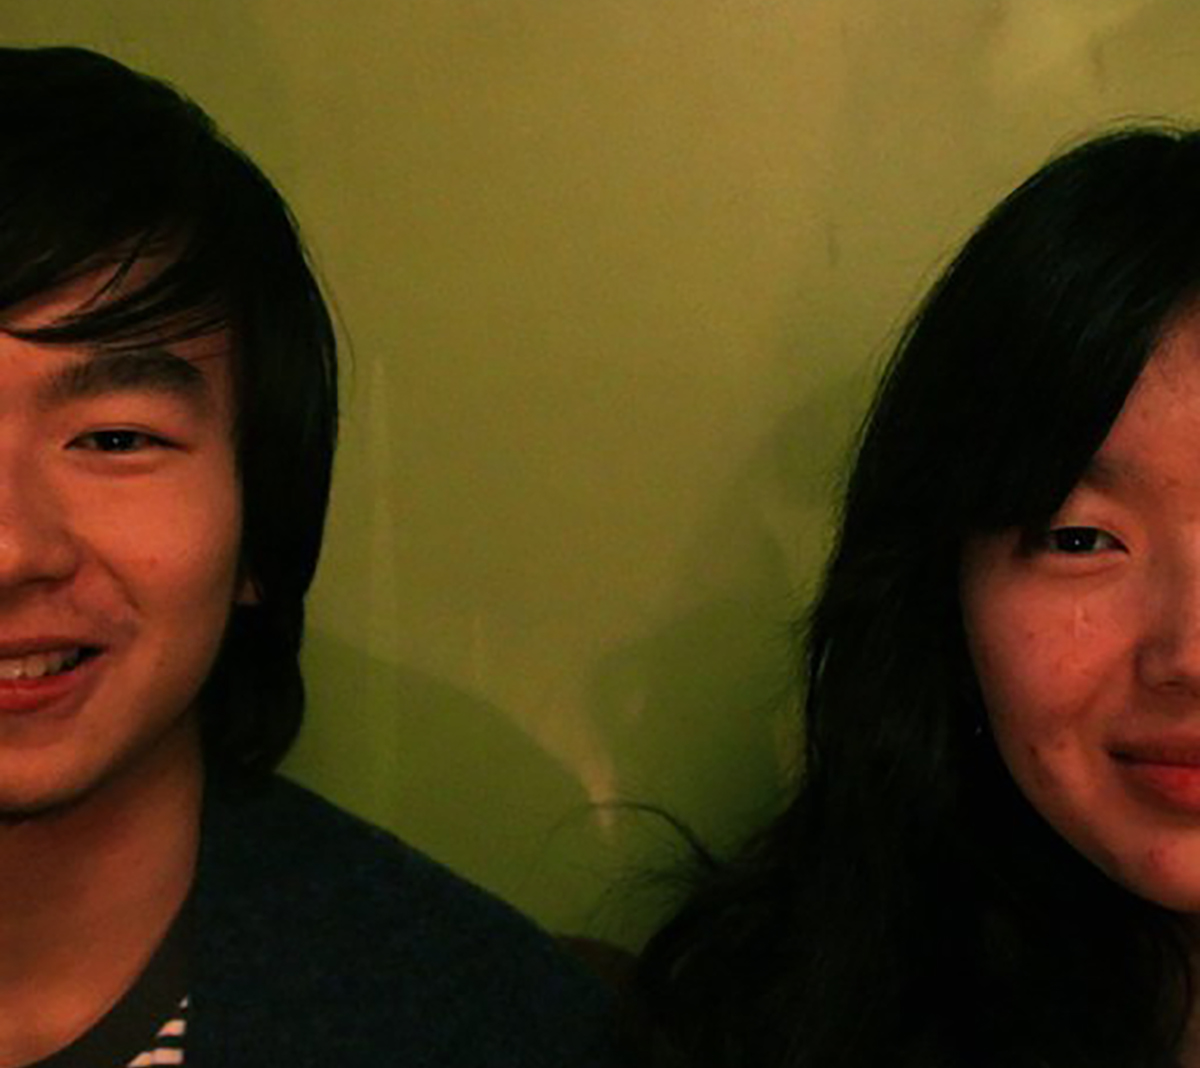 Two people with dark hair smile at the camera, green wall behind them and the outside halves of their faces cropped from the frame.